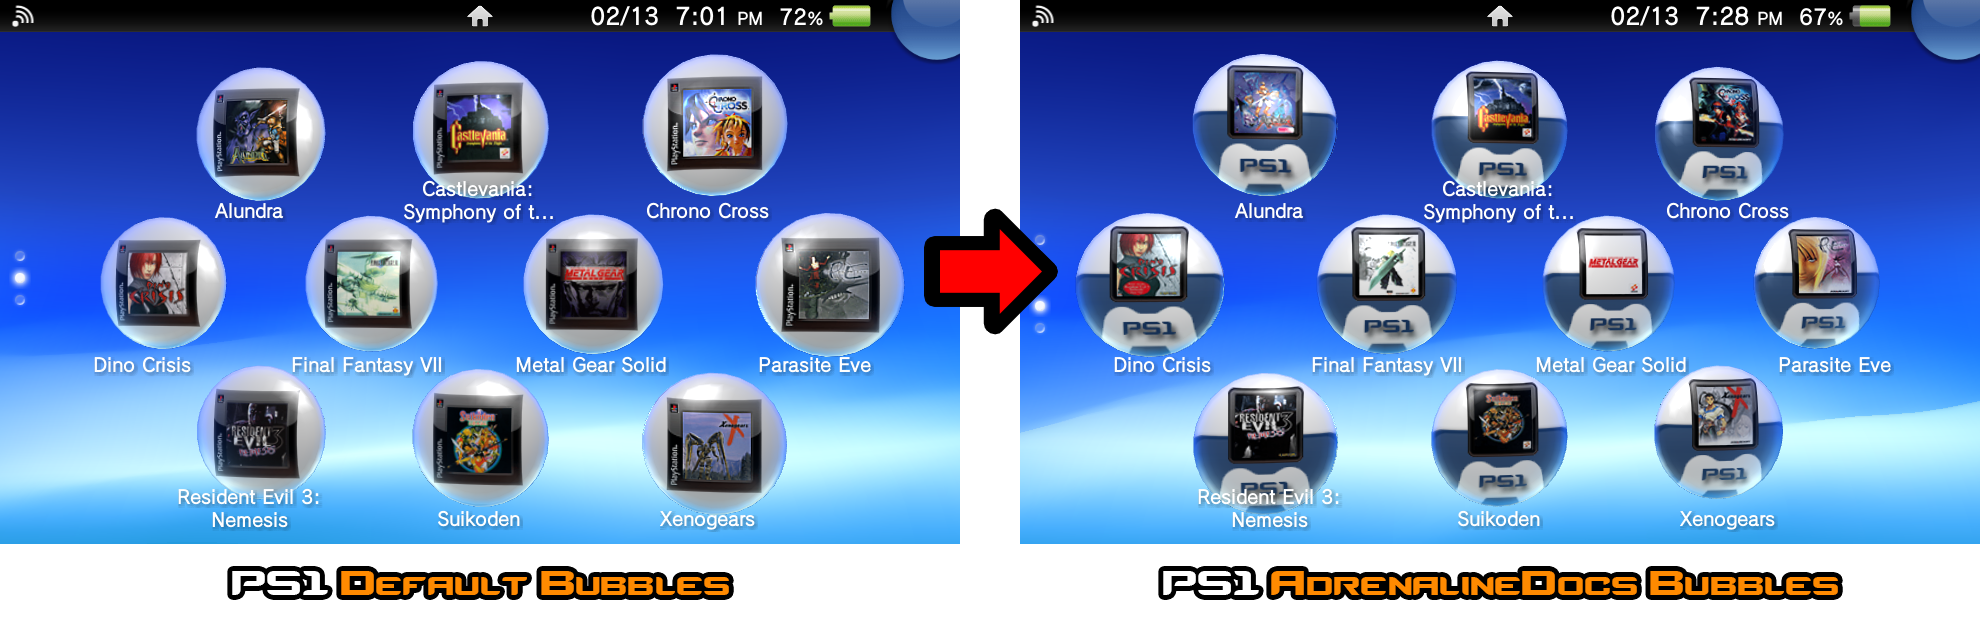 Release] AdrenalineDocs - Custom PS1 & PSP Bubbles for Adrenaline w/ Game  Manuals (700+ Bubbles) | GBAtemp.net - The Independent Video Game Community